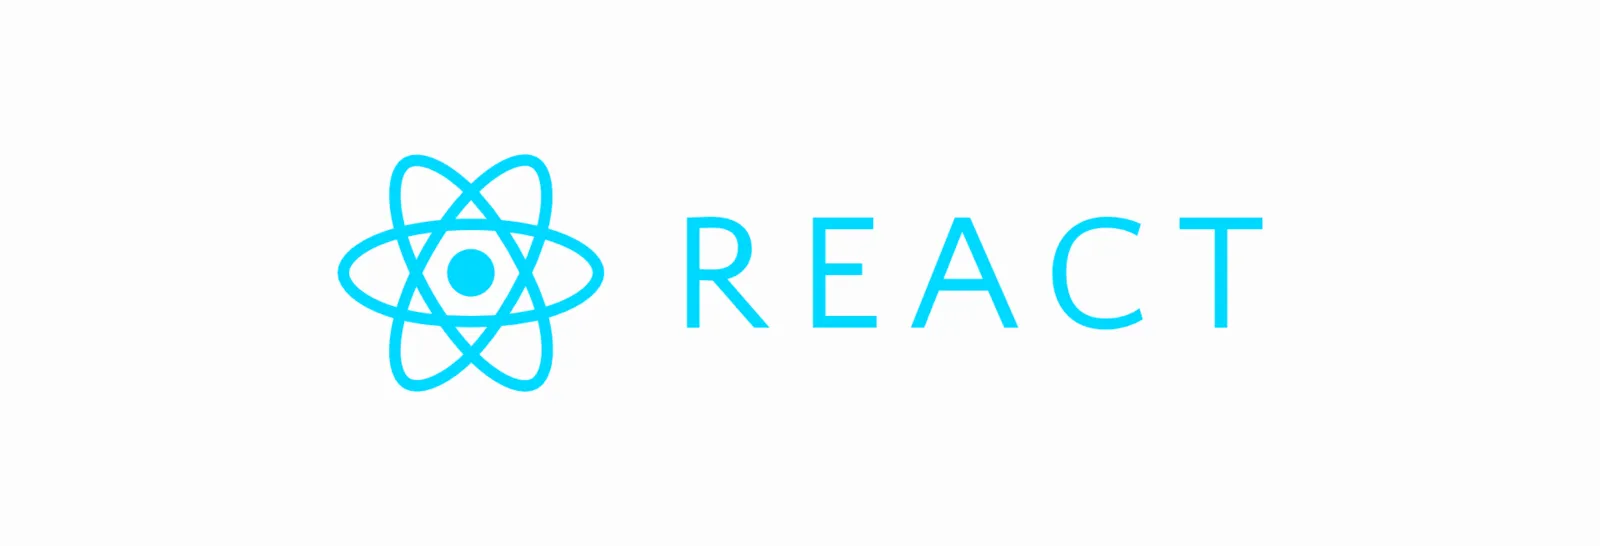 Best practices for React developers